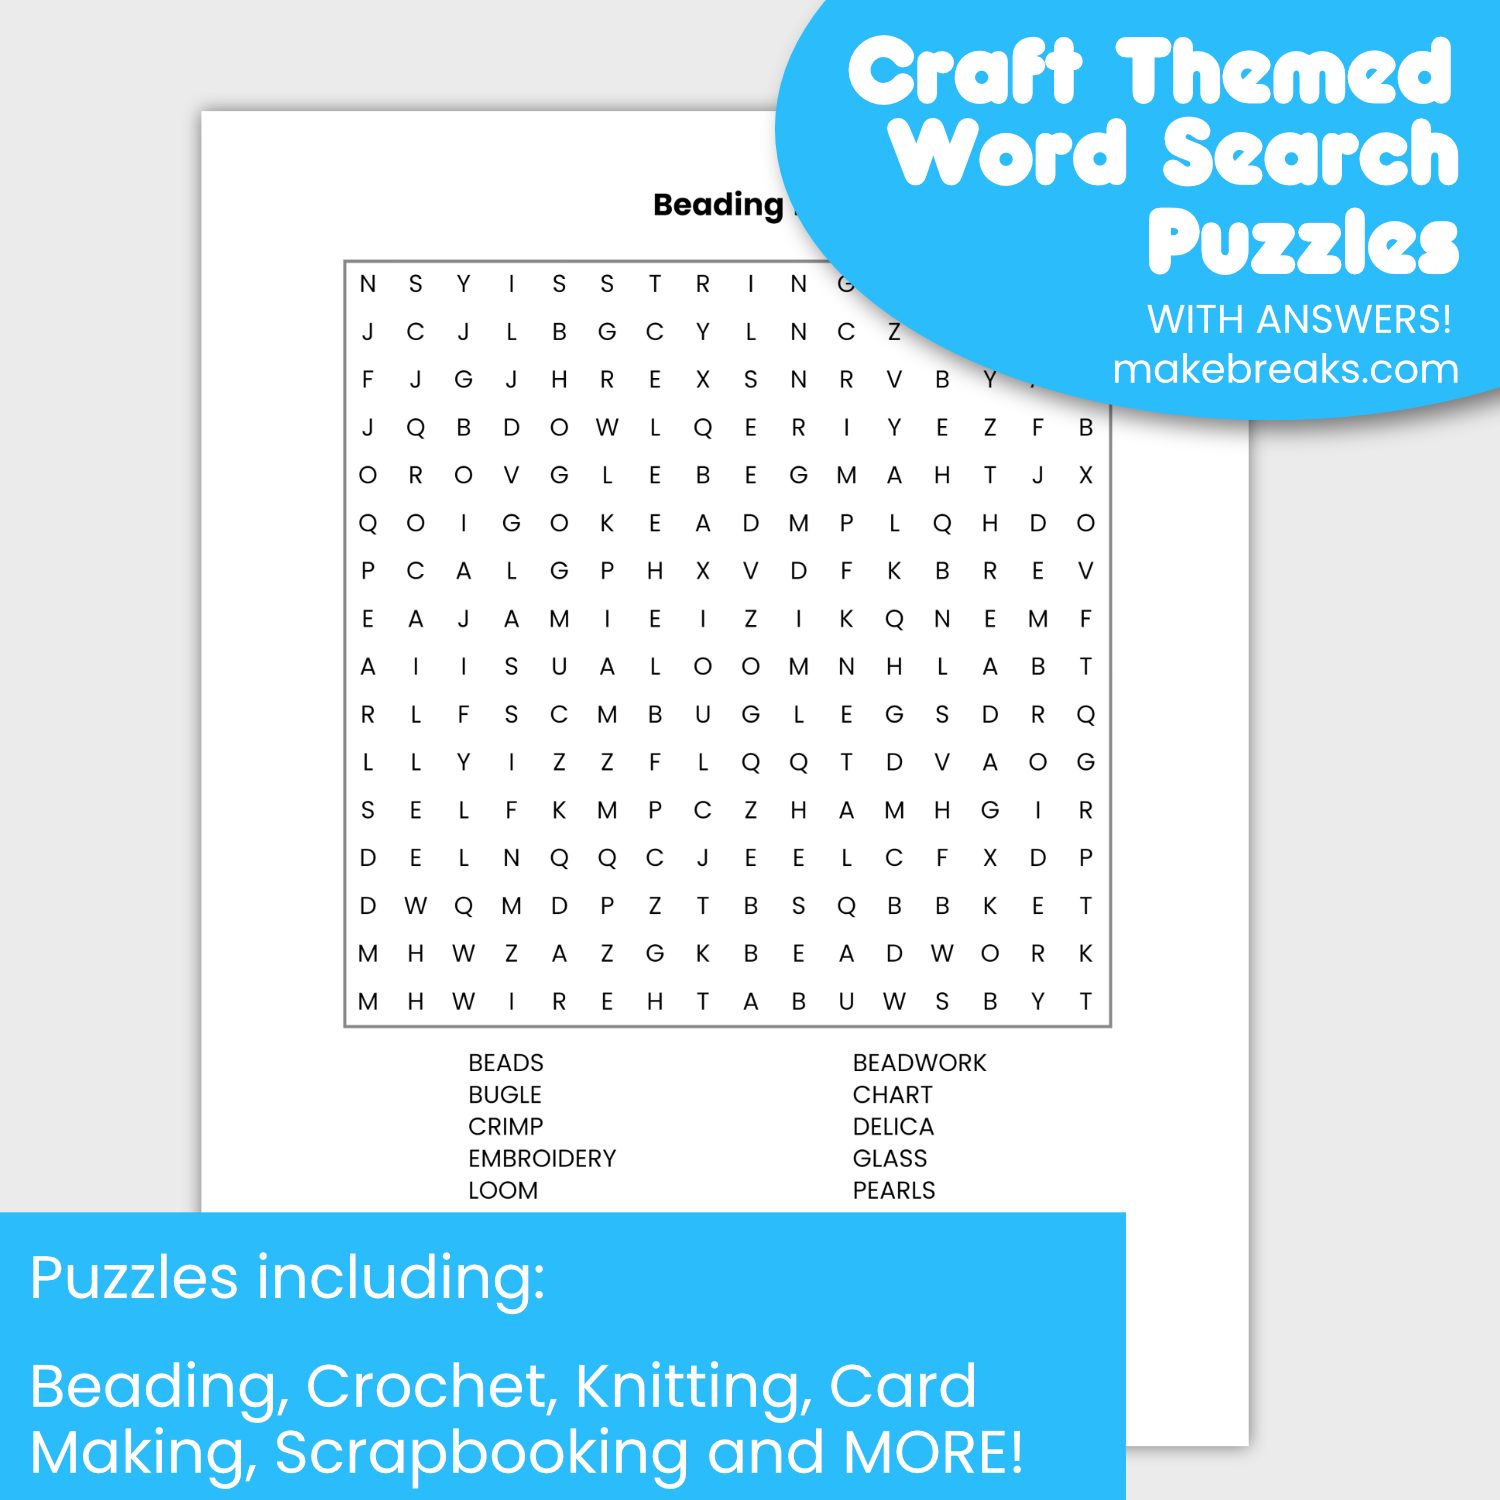 Free Craft Themed Wordsearch Puzzles